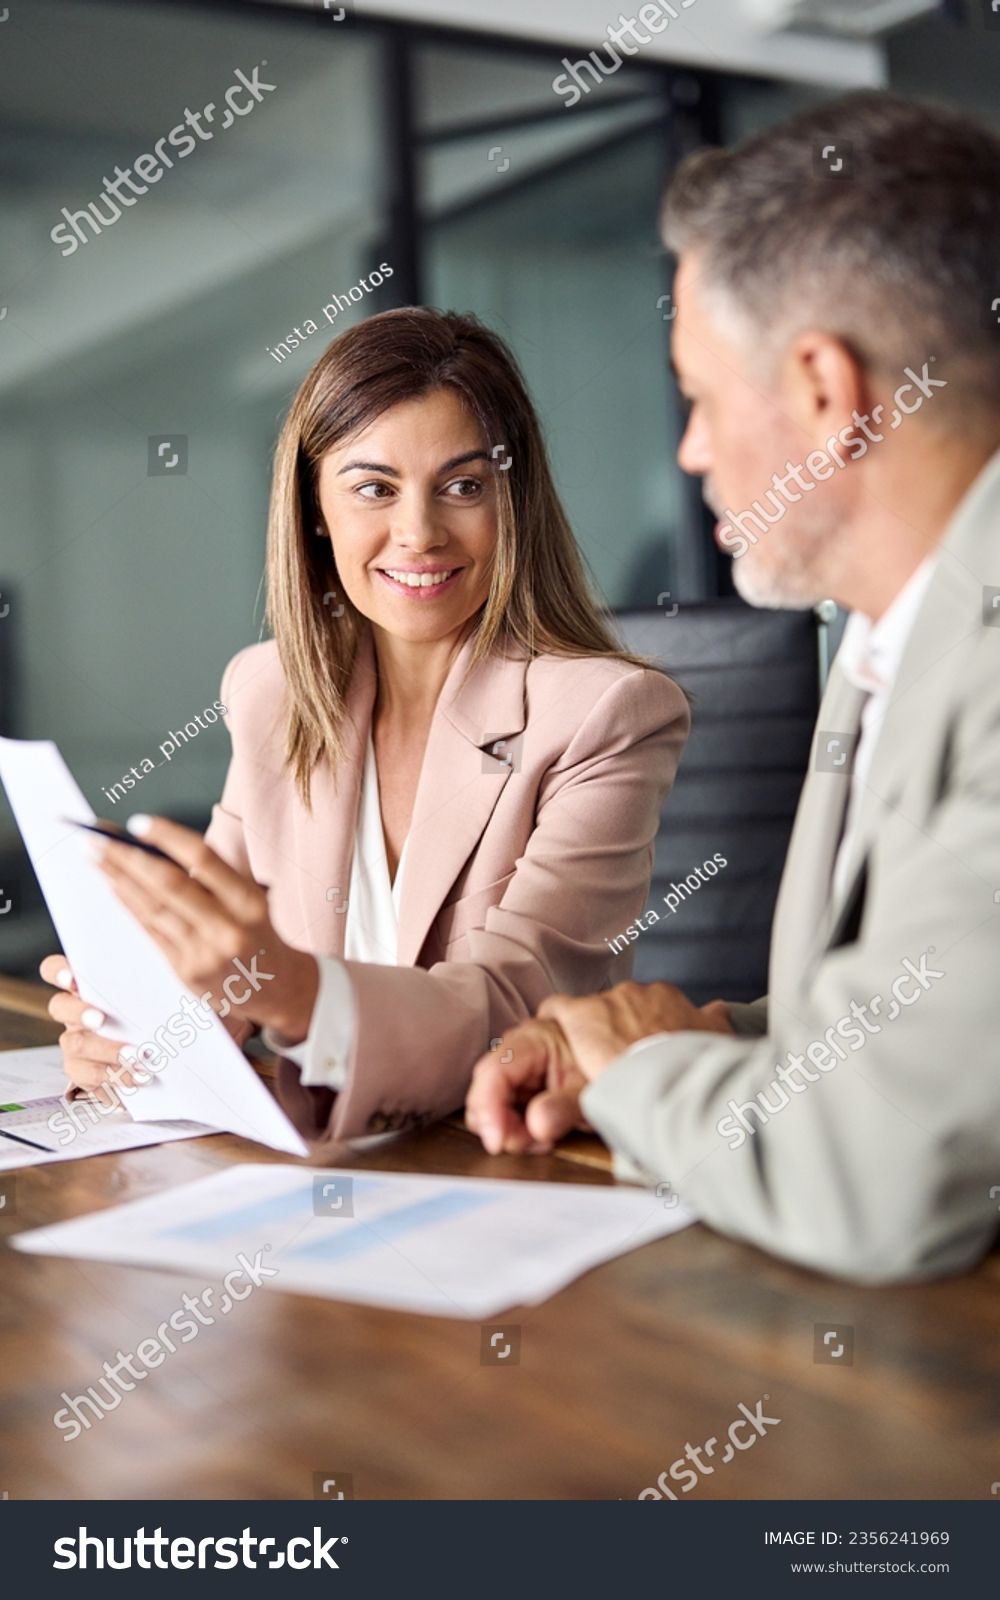 Female lawyer or financial advisor consulting older male client investor showing documents at meeting. Two mature business executive colleagues discussing account paperwork report in office. Vertical #2356241969